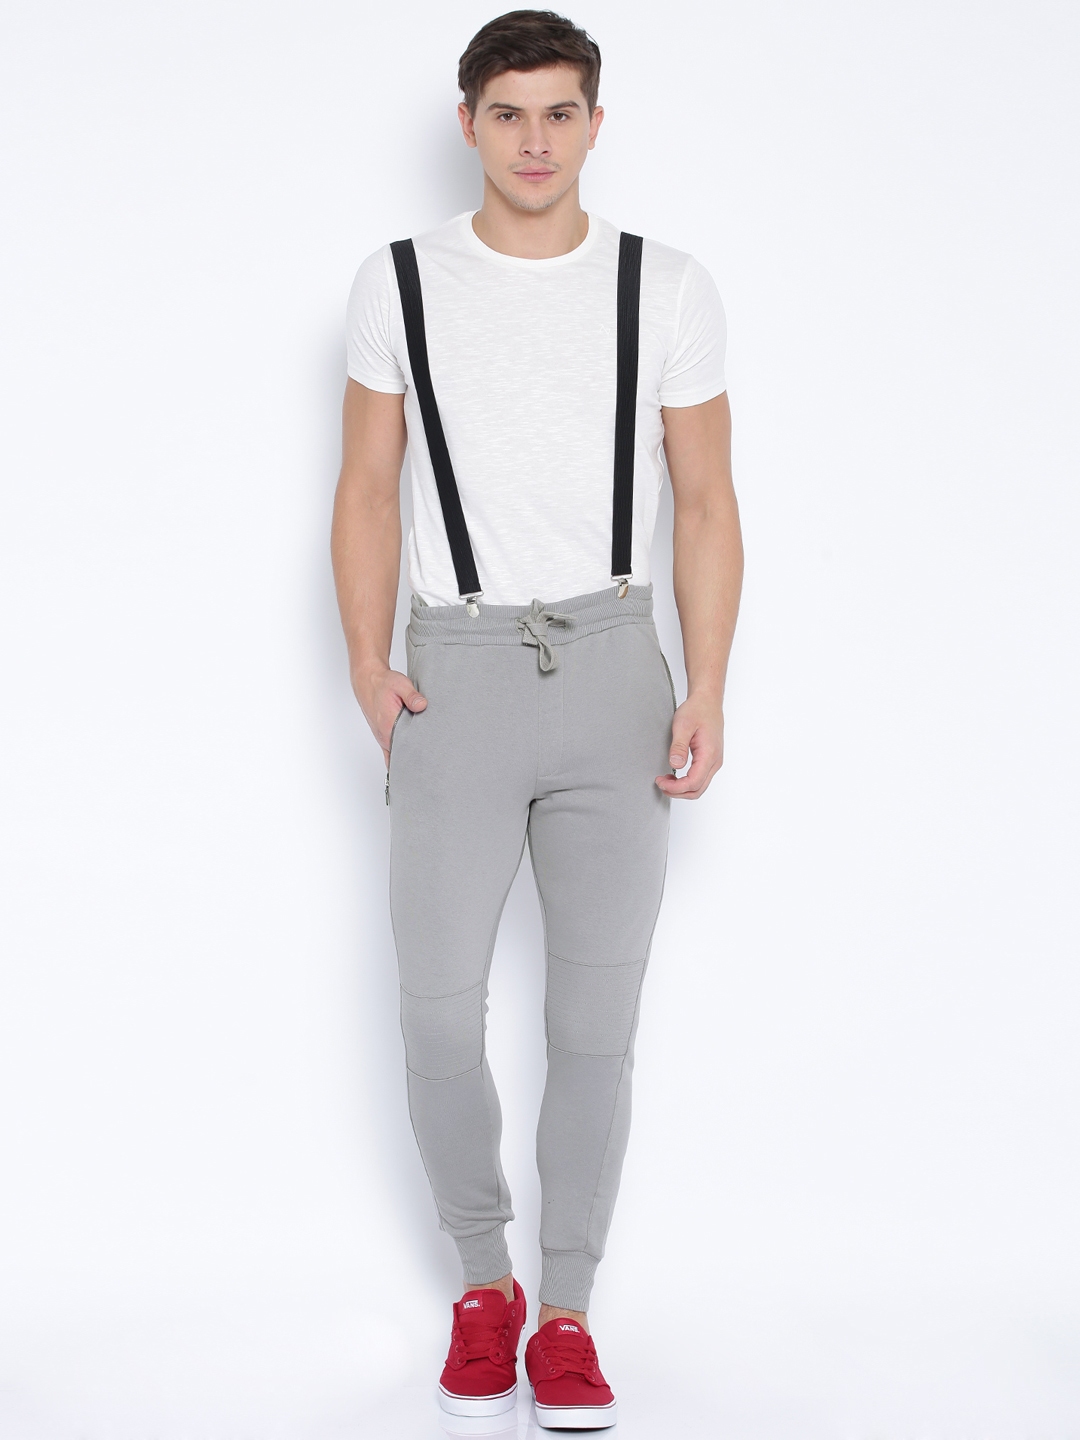 How to Wear Braces  32 Mens Outfits With Suspenders